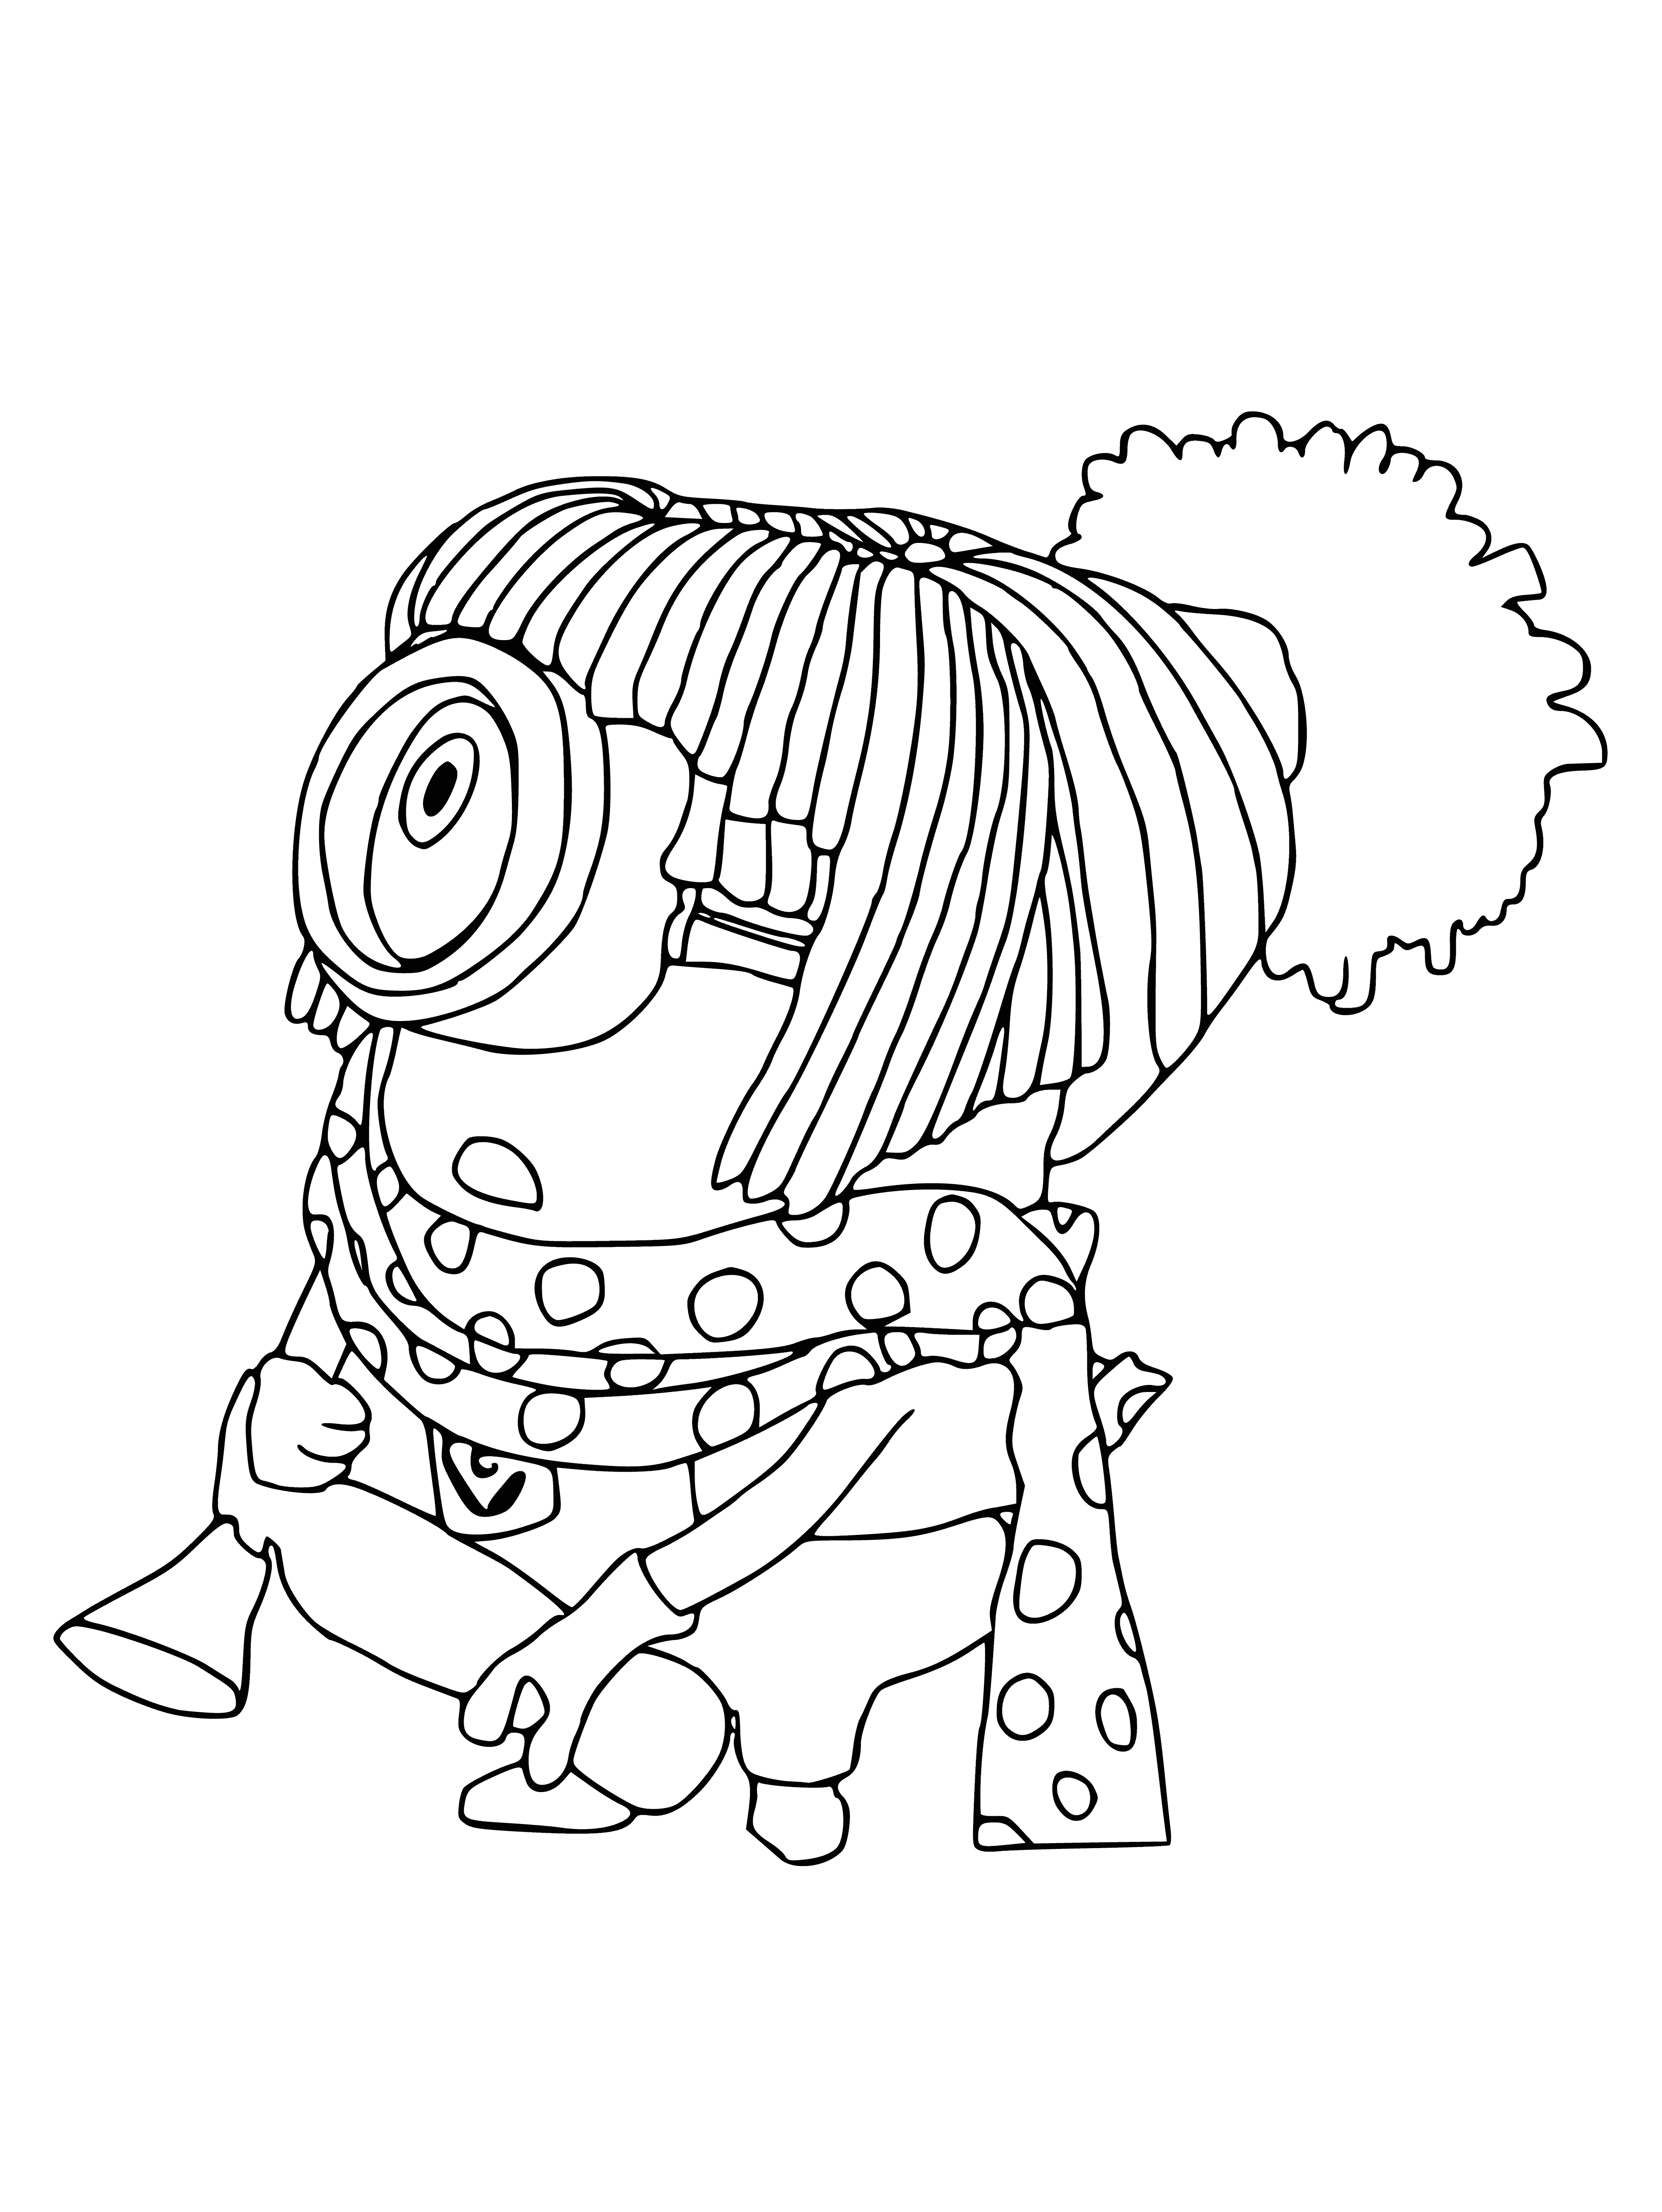 Mignon Lucy coloring page